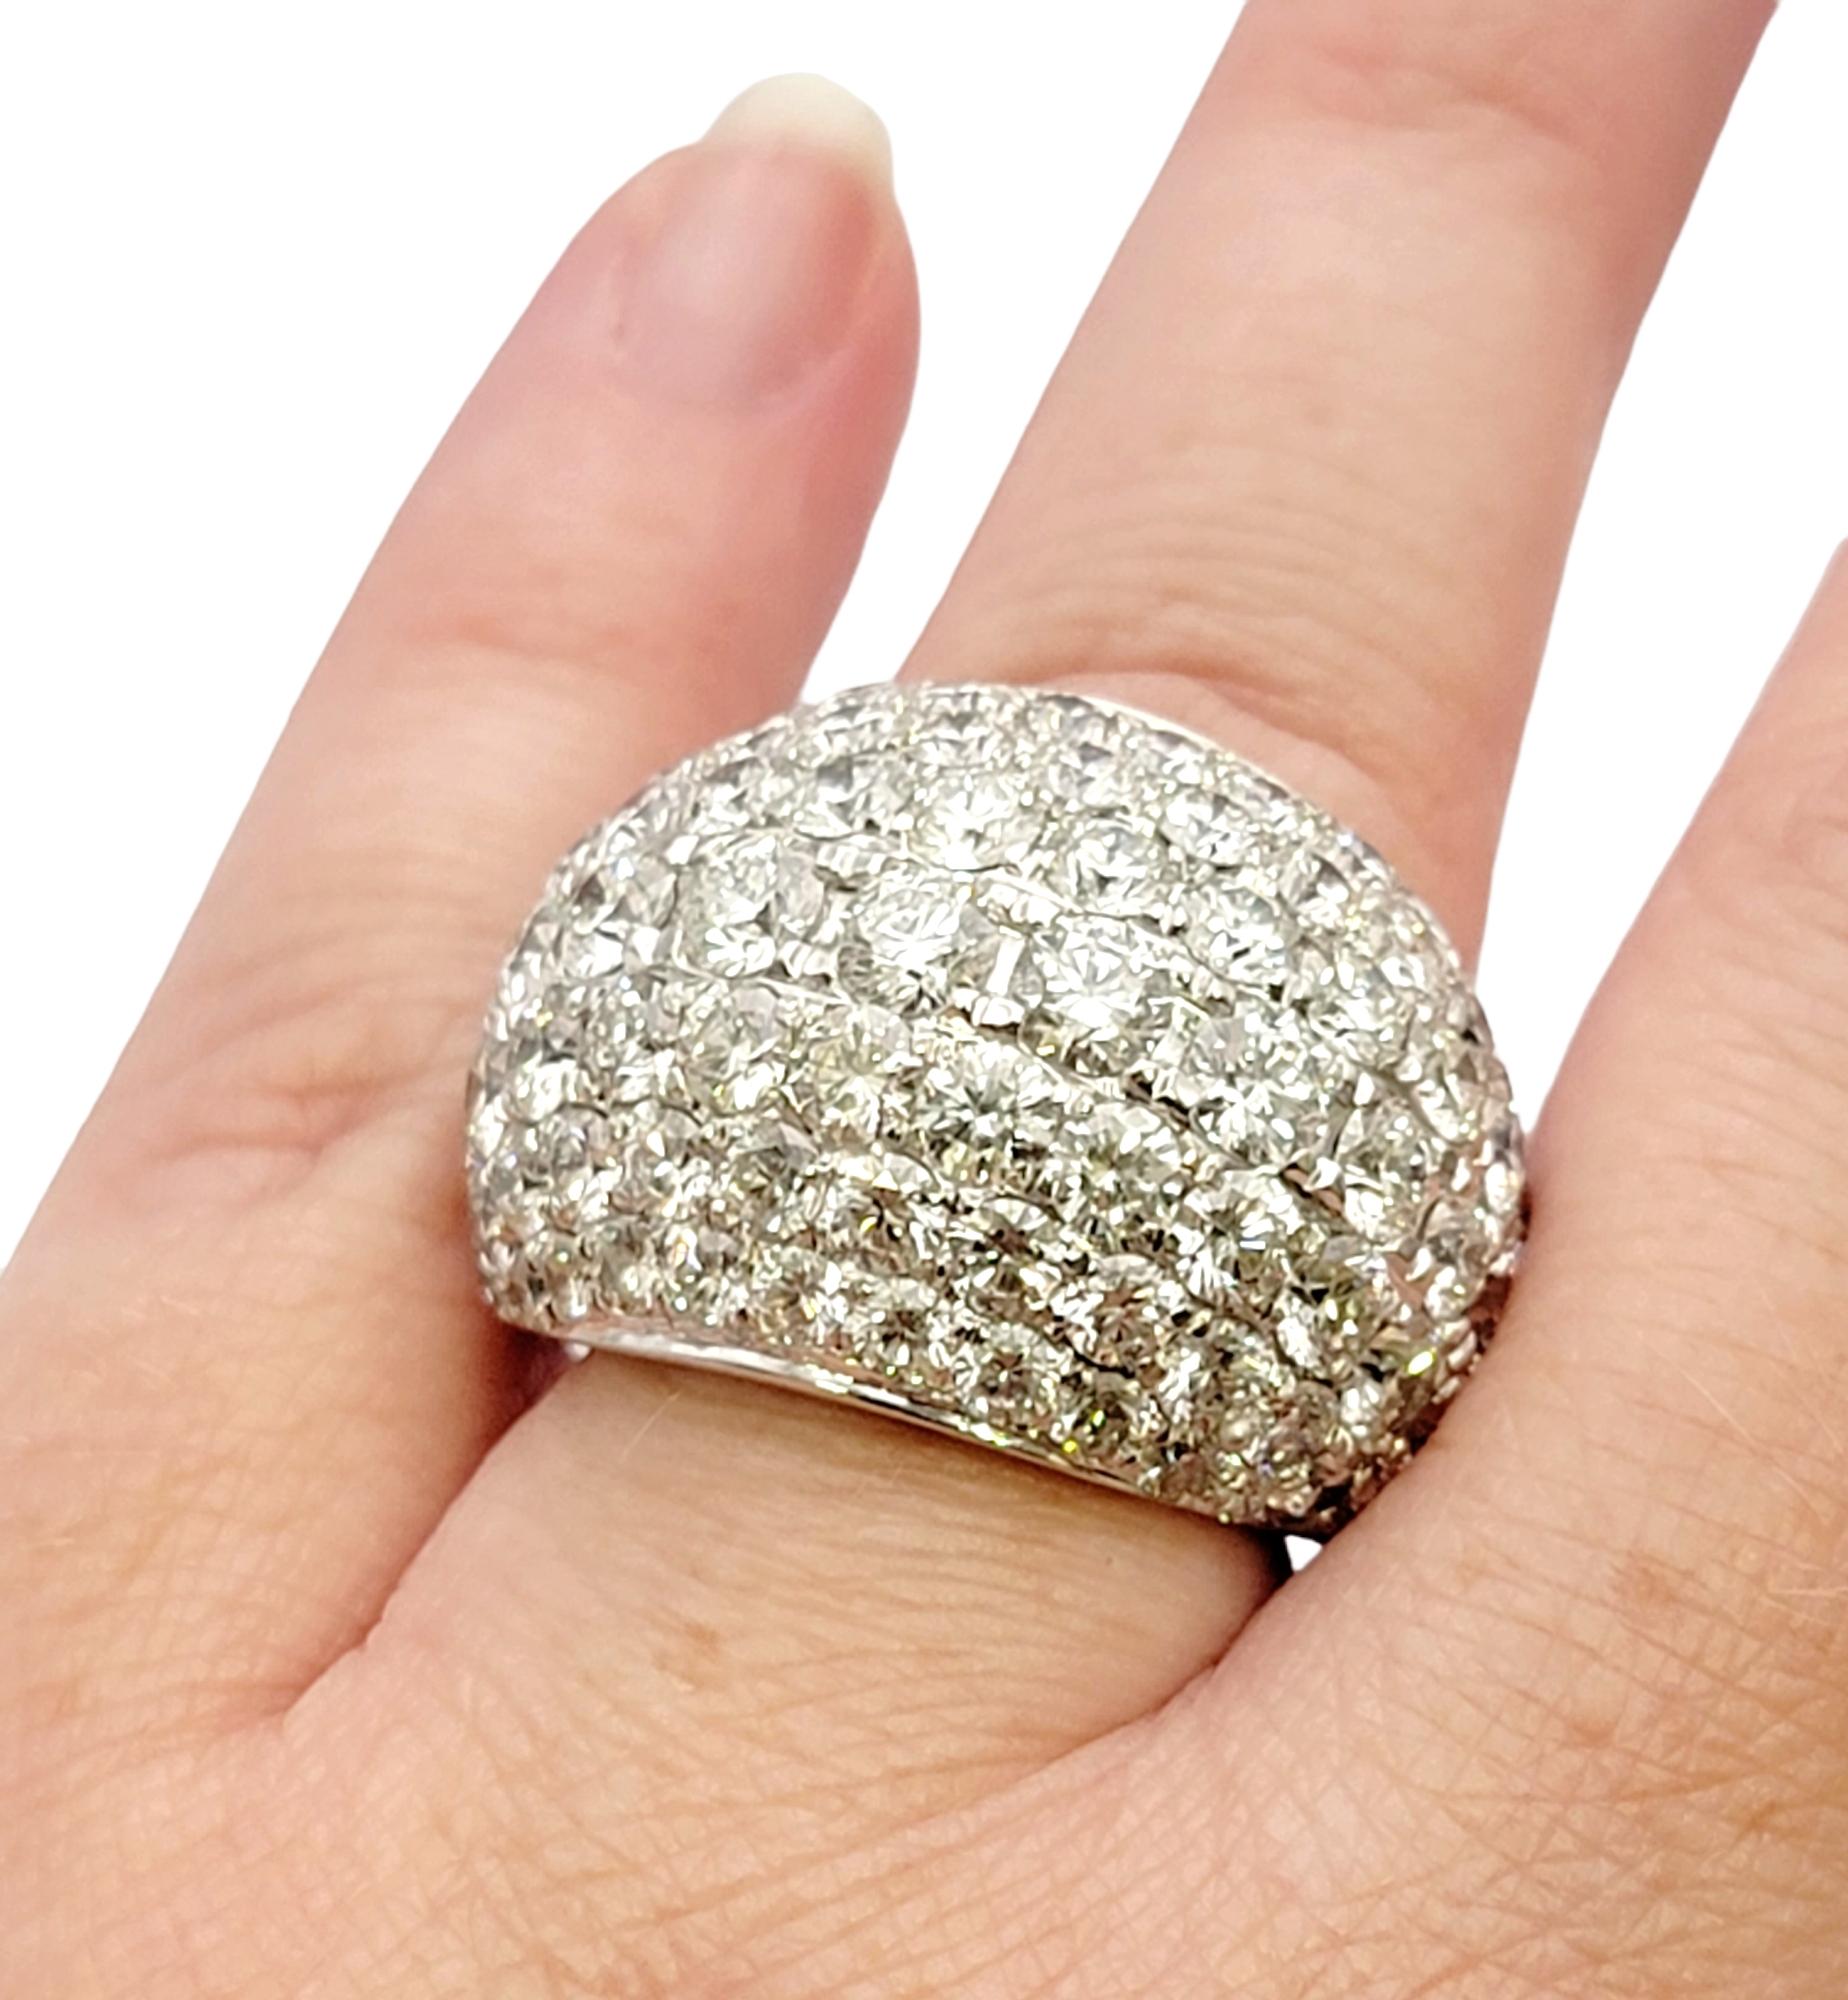 Huge Round Pave Diamond Dome Lollipop Ring in 14 Karat White Gold 9 Carats Total For Sale 1